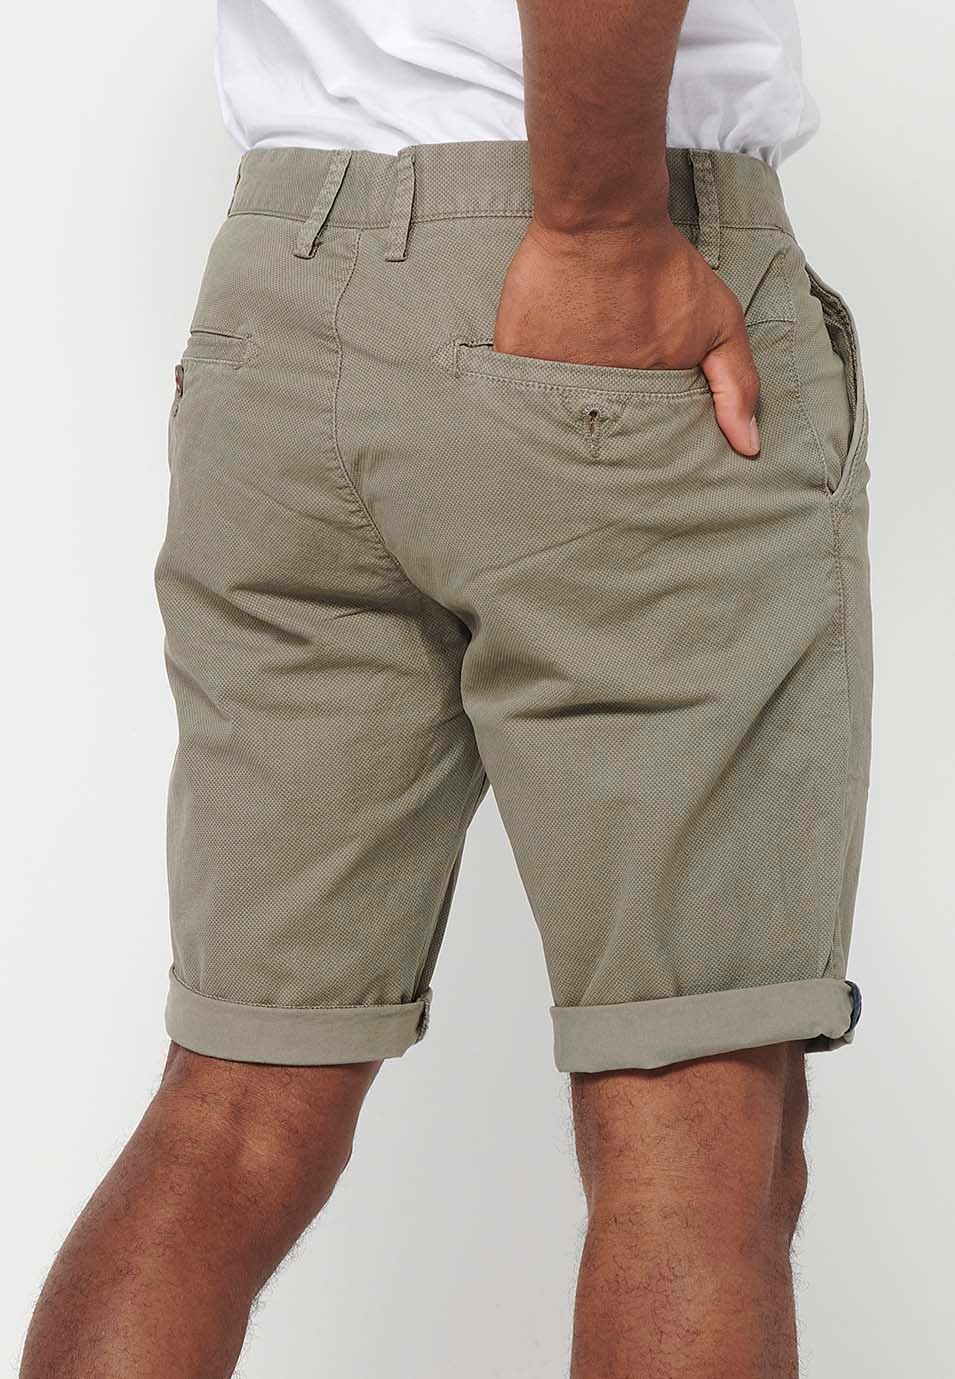 Men's Bermuda Chino Shorts with Turn-Up Finish with Front Zipper and Button Closure with Four Pockets in Mink Color 5